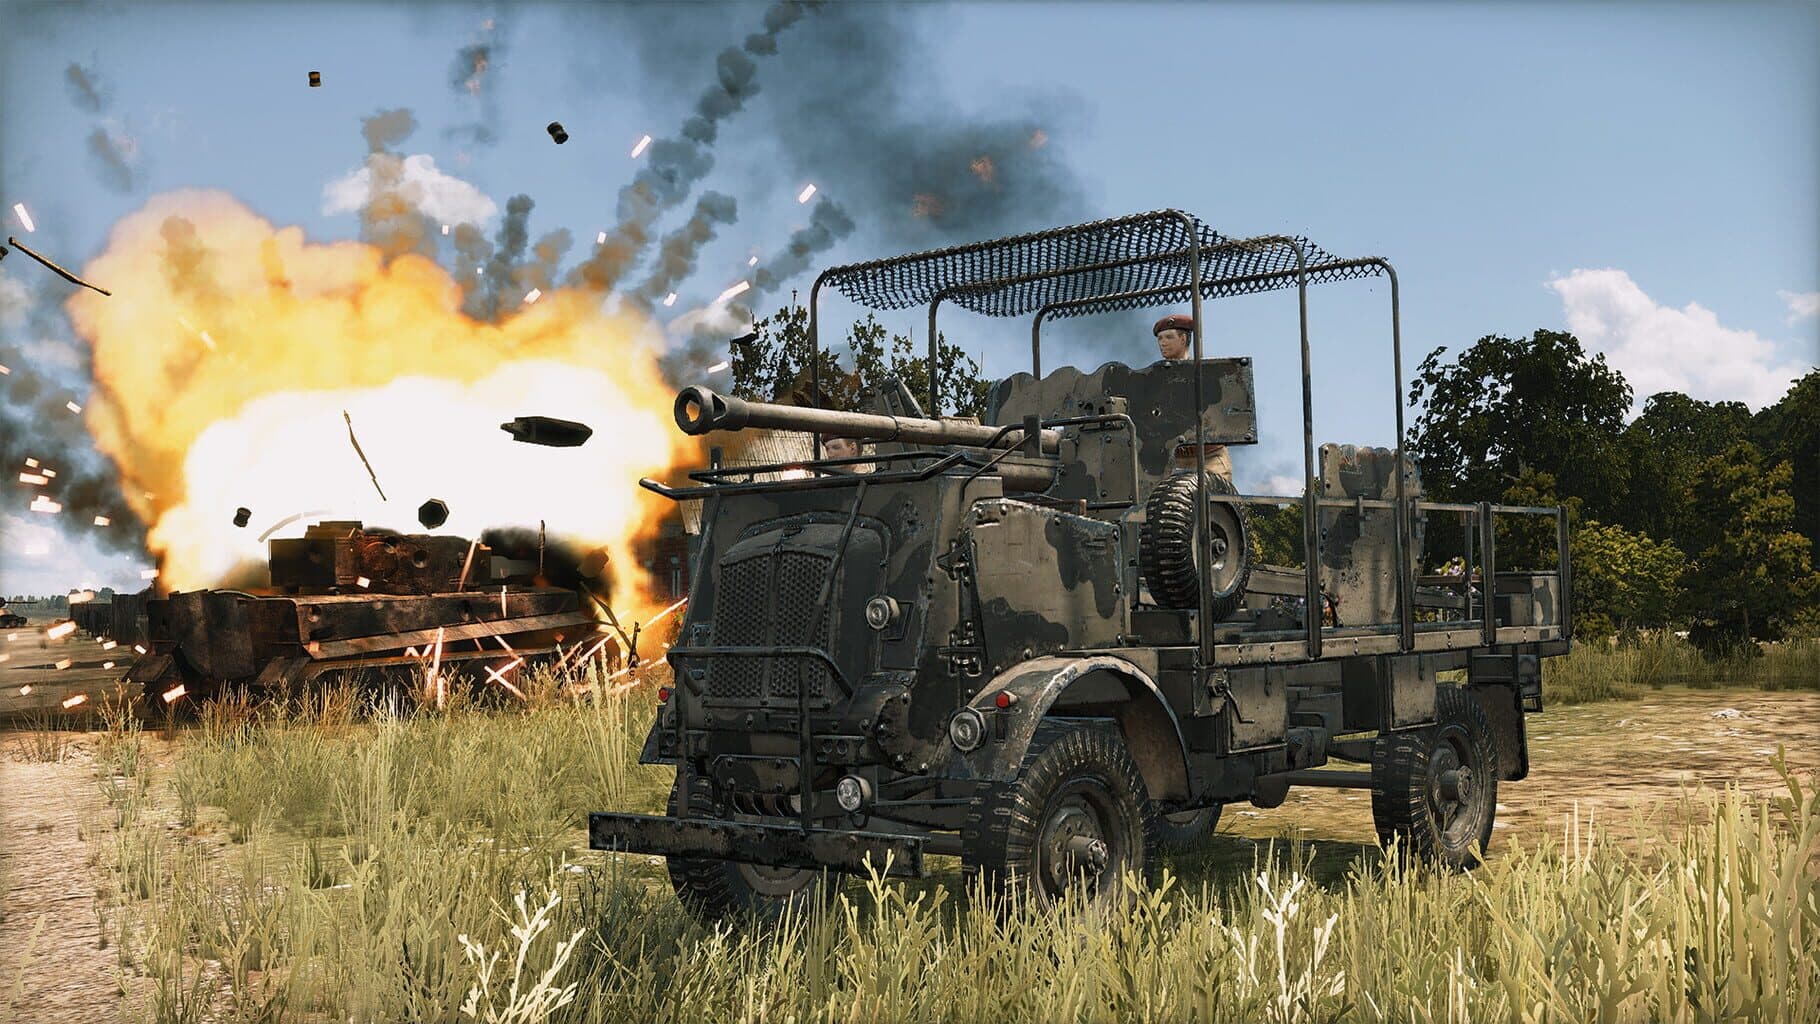 Steel Division 2: Tribute to the Liberation of Italy Image